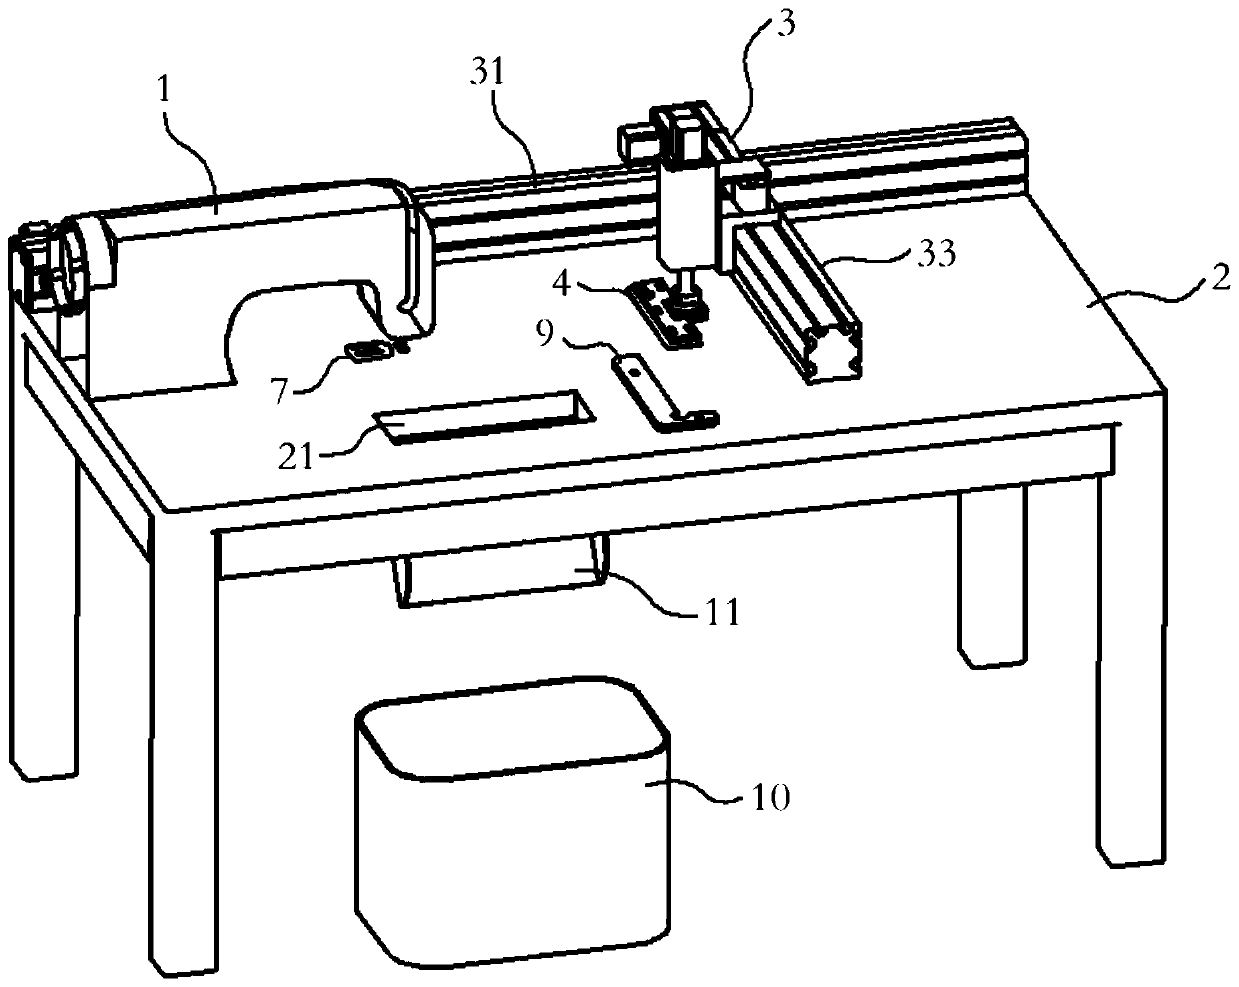 An automatic sewing device for topstitching